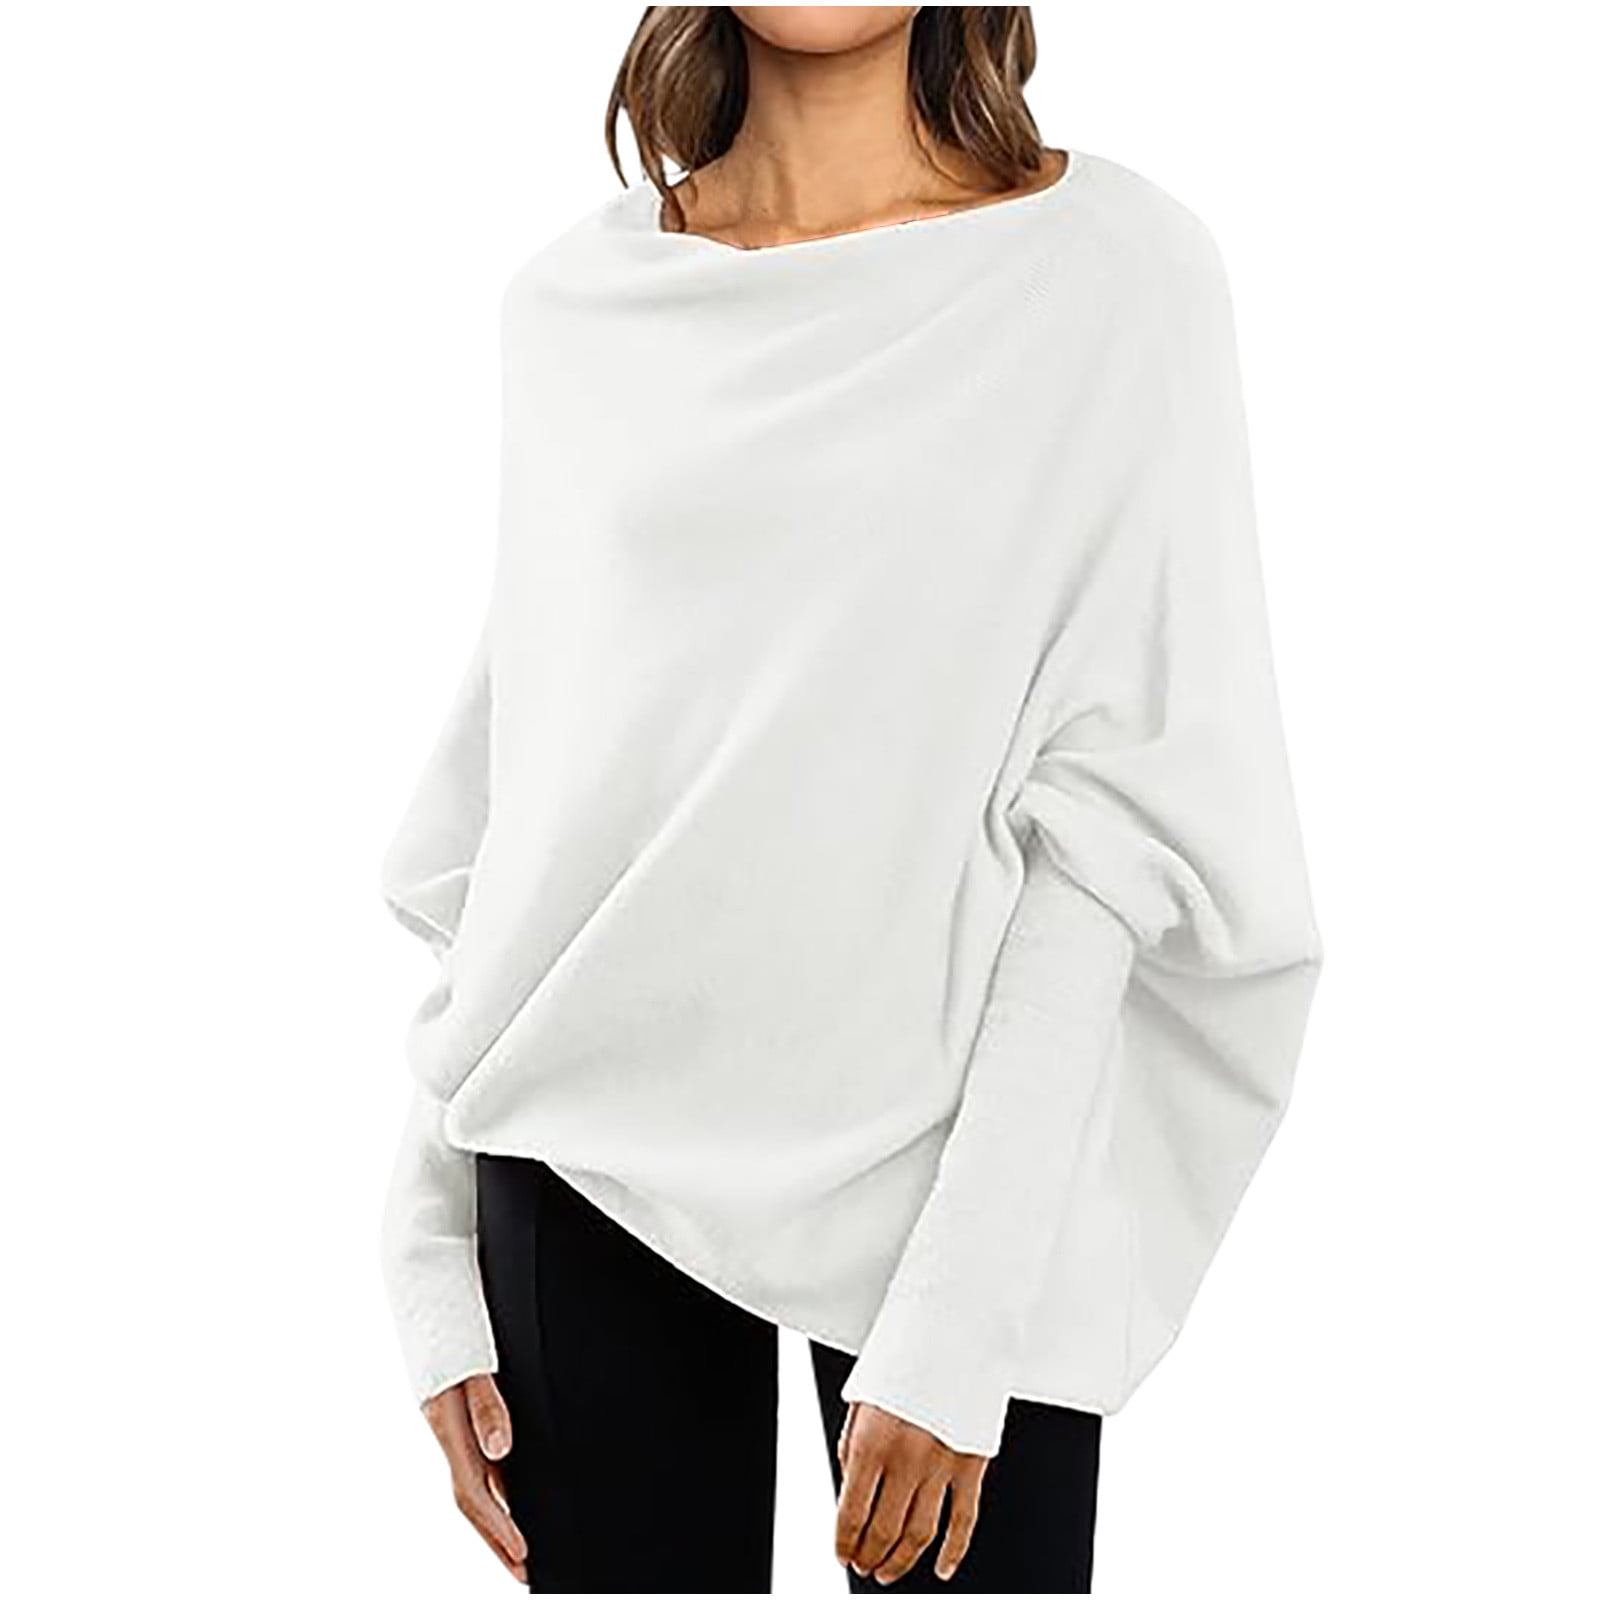 RYRJJ Womens Oversized Ccasual Sweaters Long Batwing Sleeve Boat Neck ...